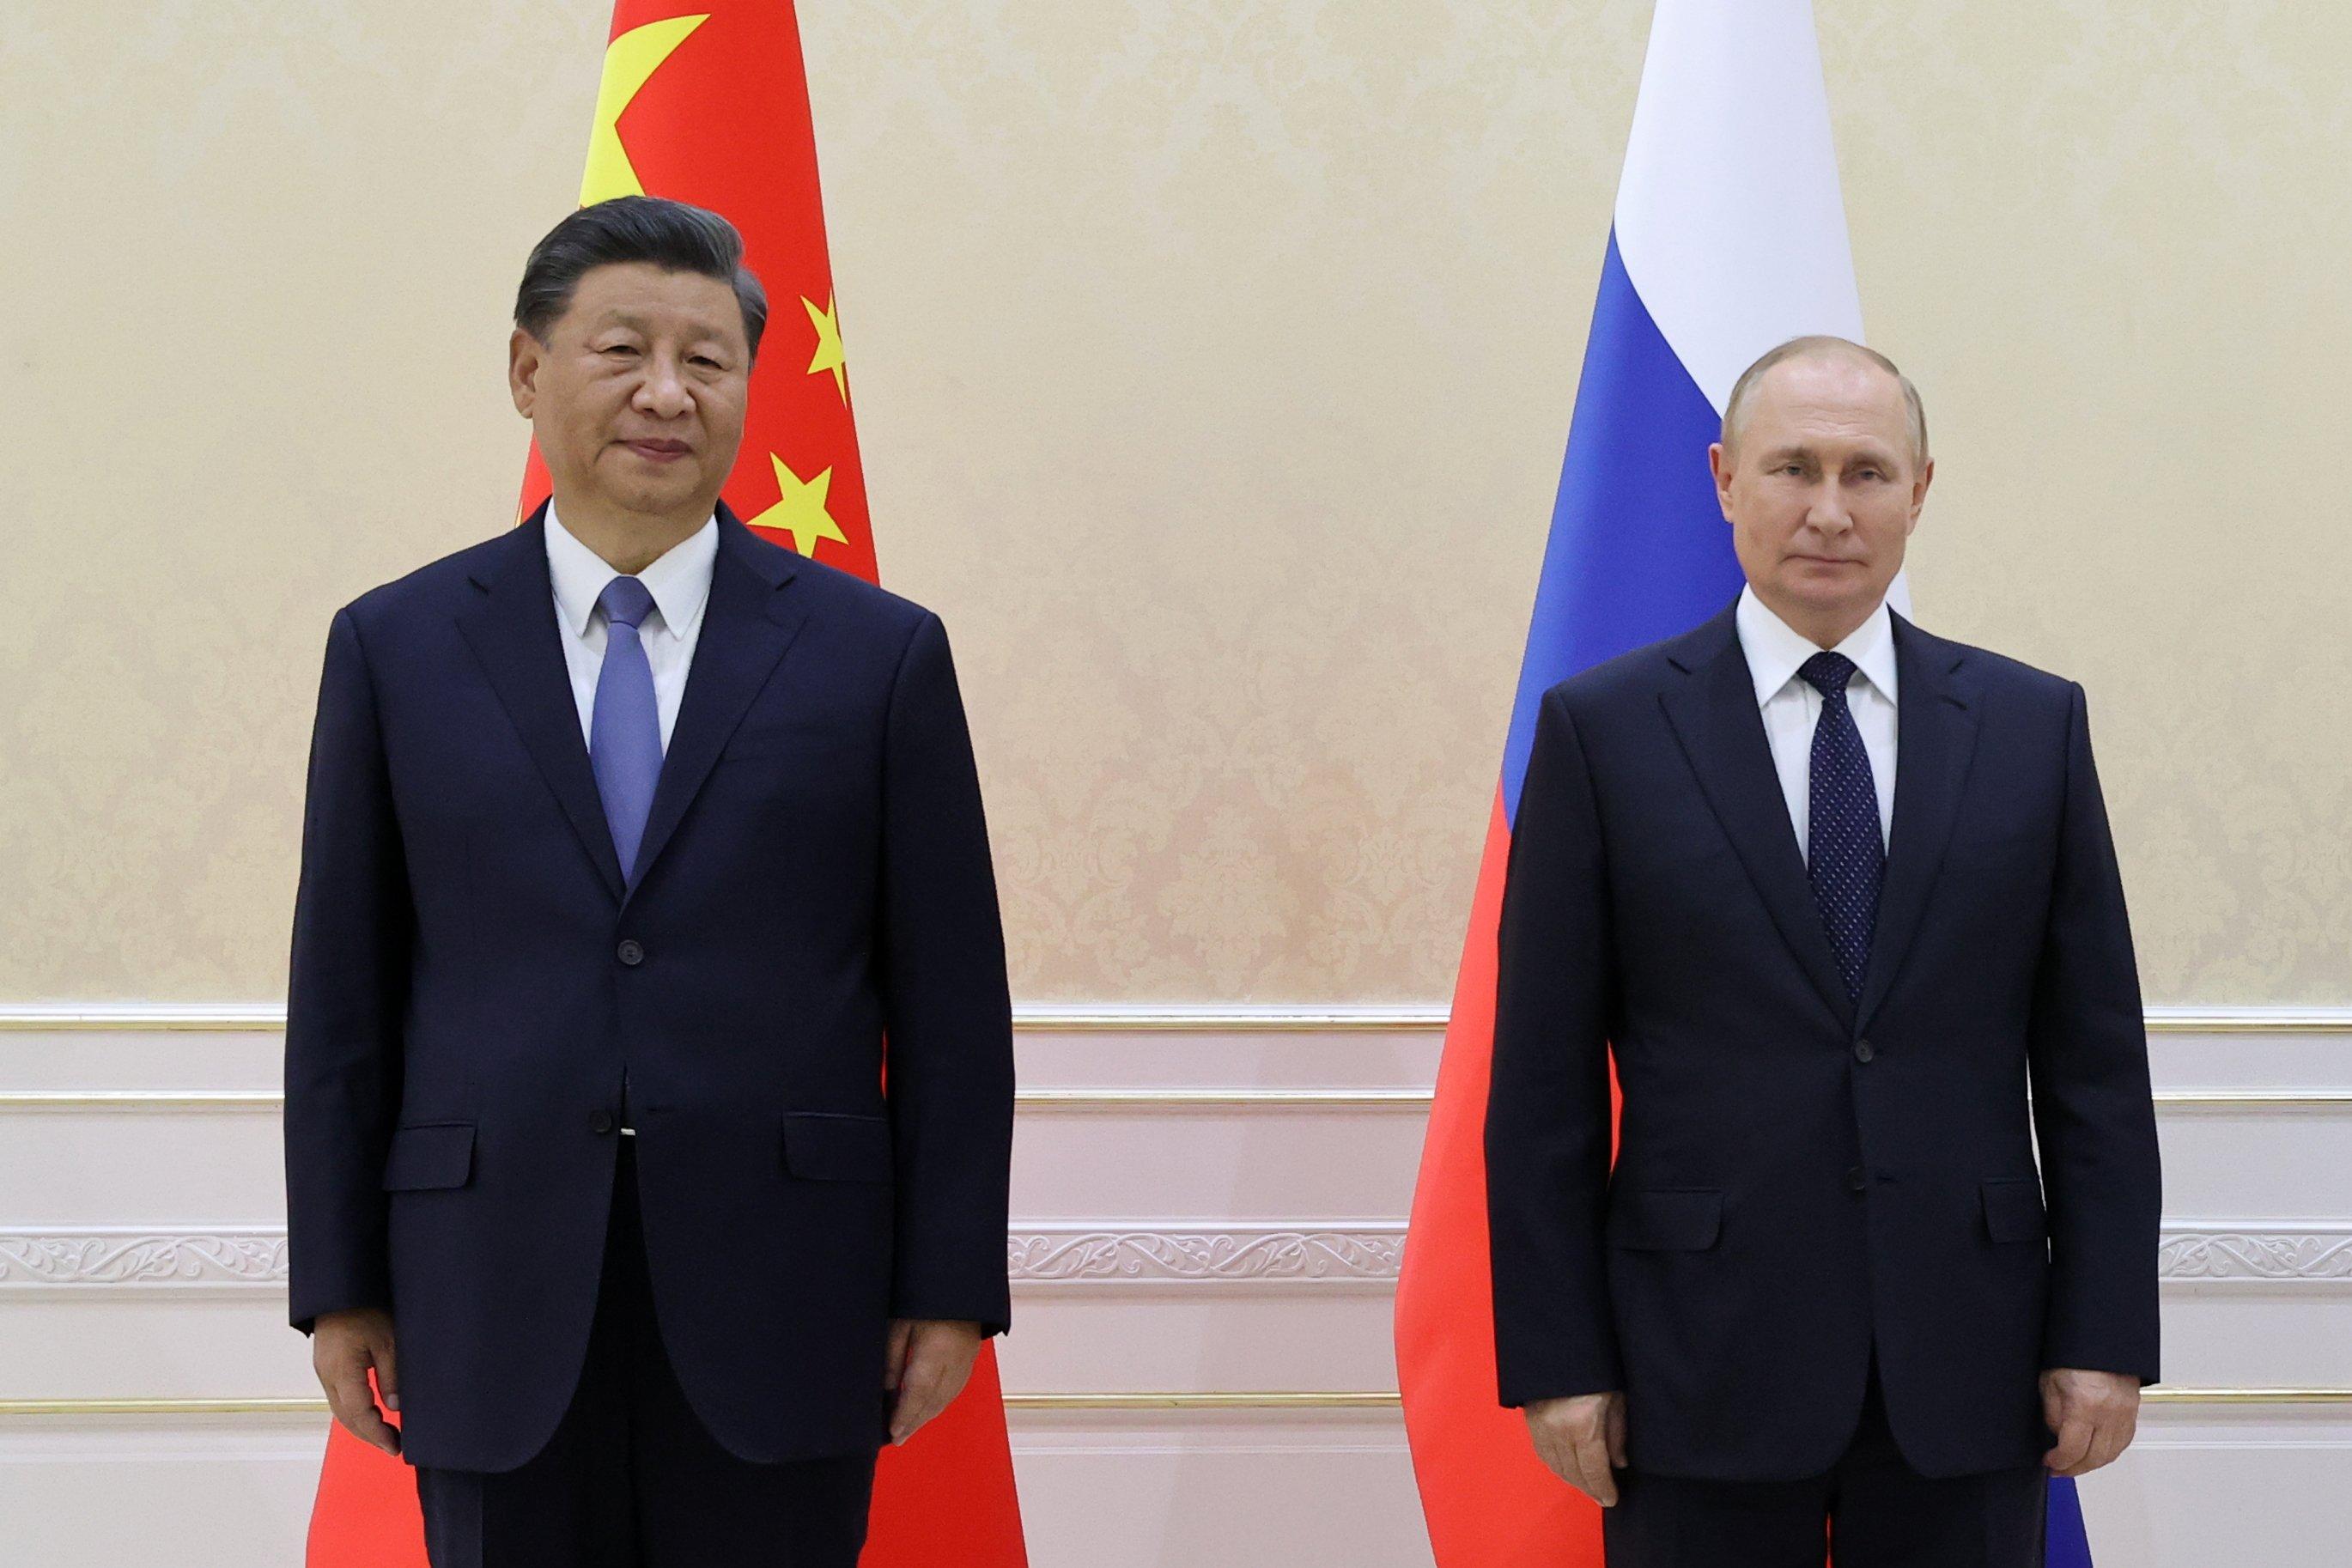 China's President Xi Jinping and Russian President Vladimir Putin pose with Mongolia's President during their trilateral meeting on the sidelines of the Shanghai Cooperation Organisation (SCO) leaders' summit in Samarkand on September 15, 2022. (Photo by Alexandr Demyanchuk / SPUTNIK / AFP)